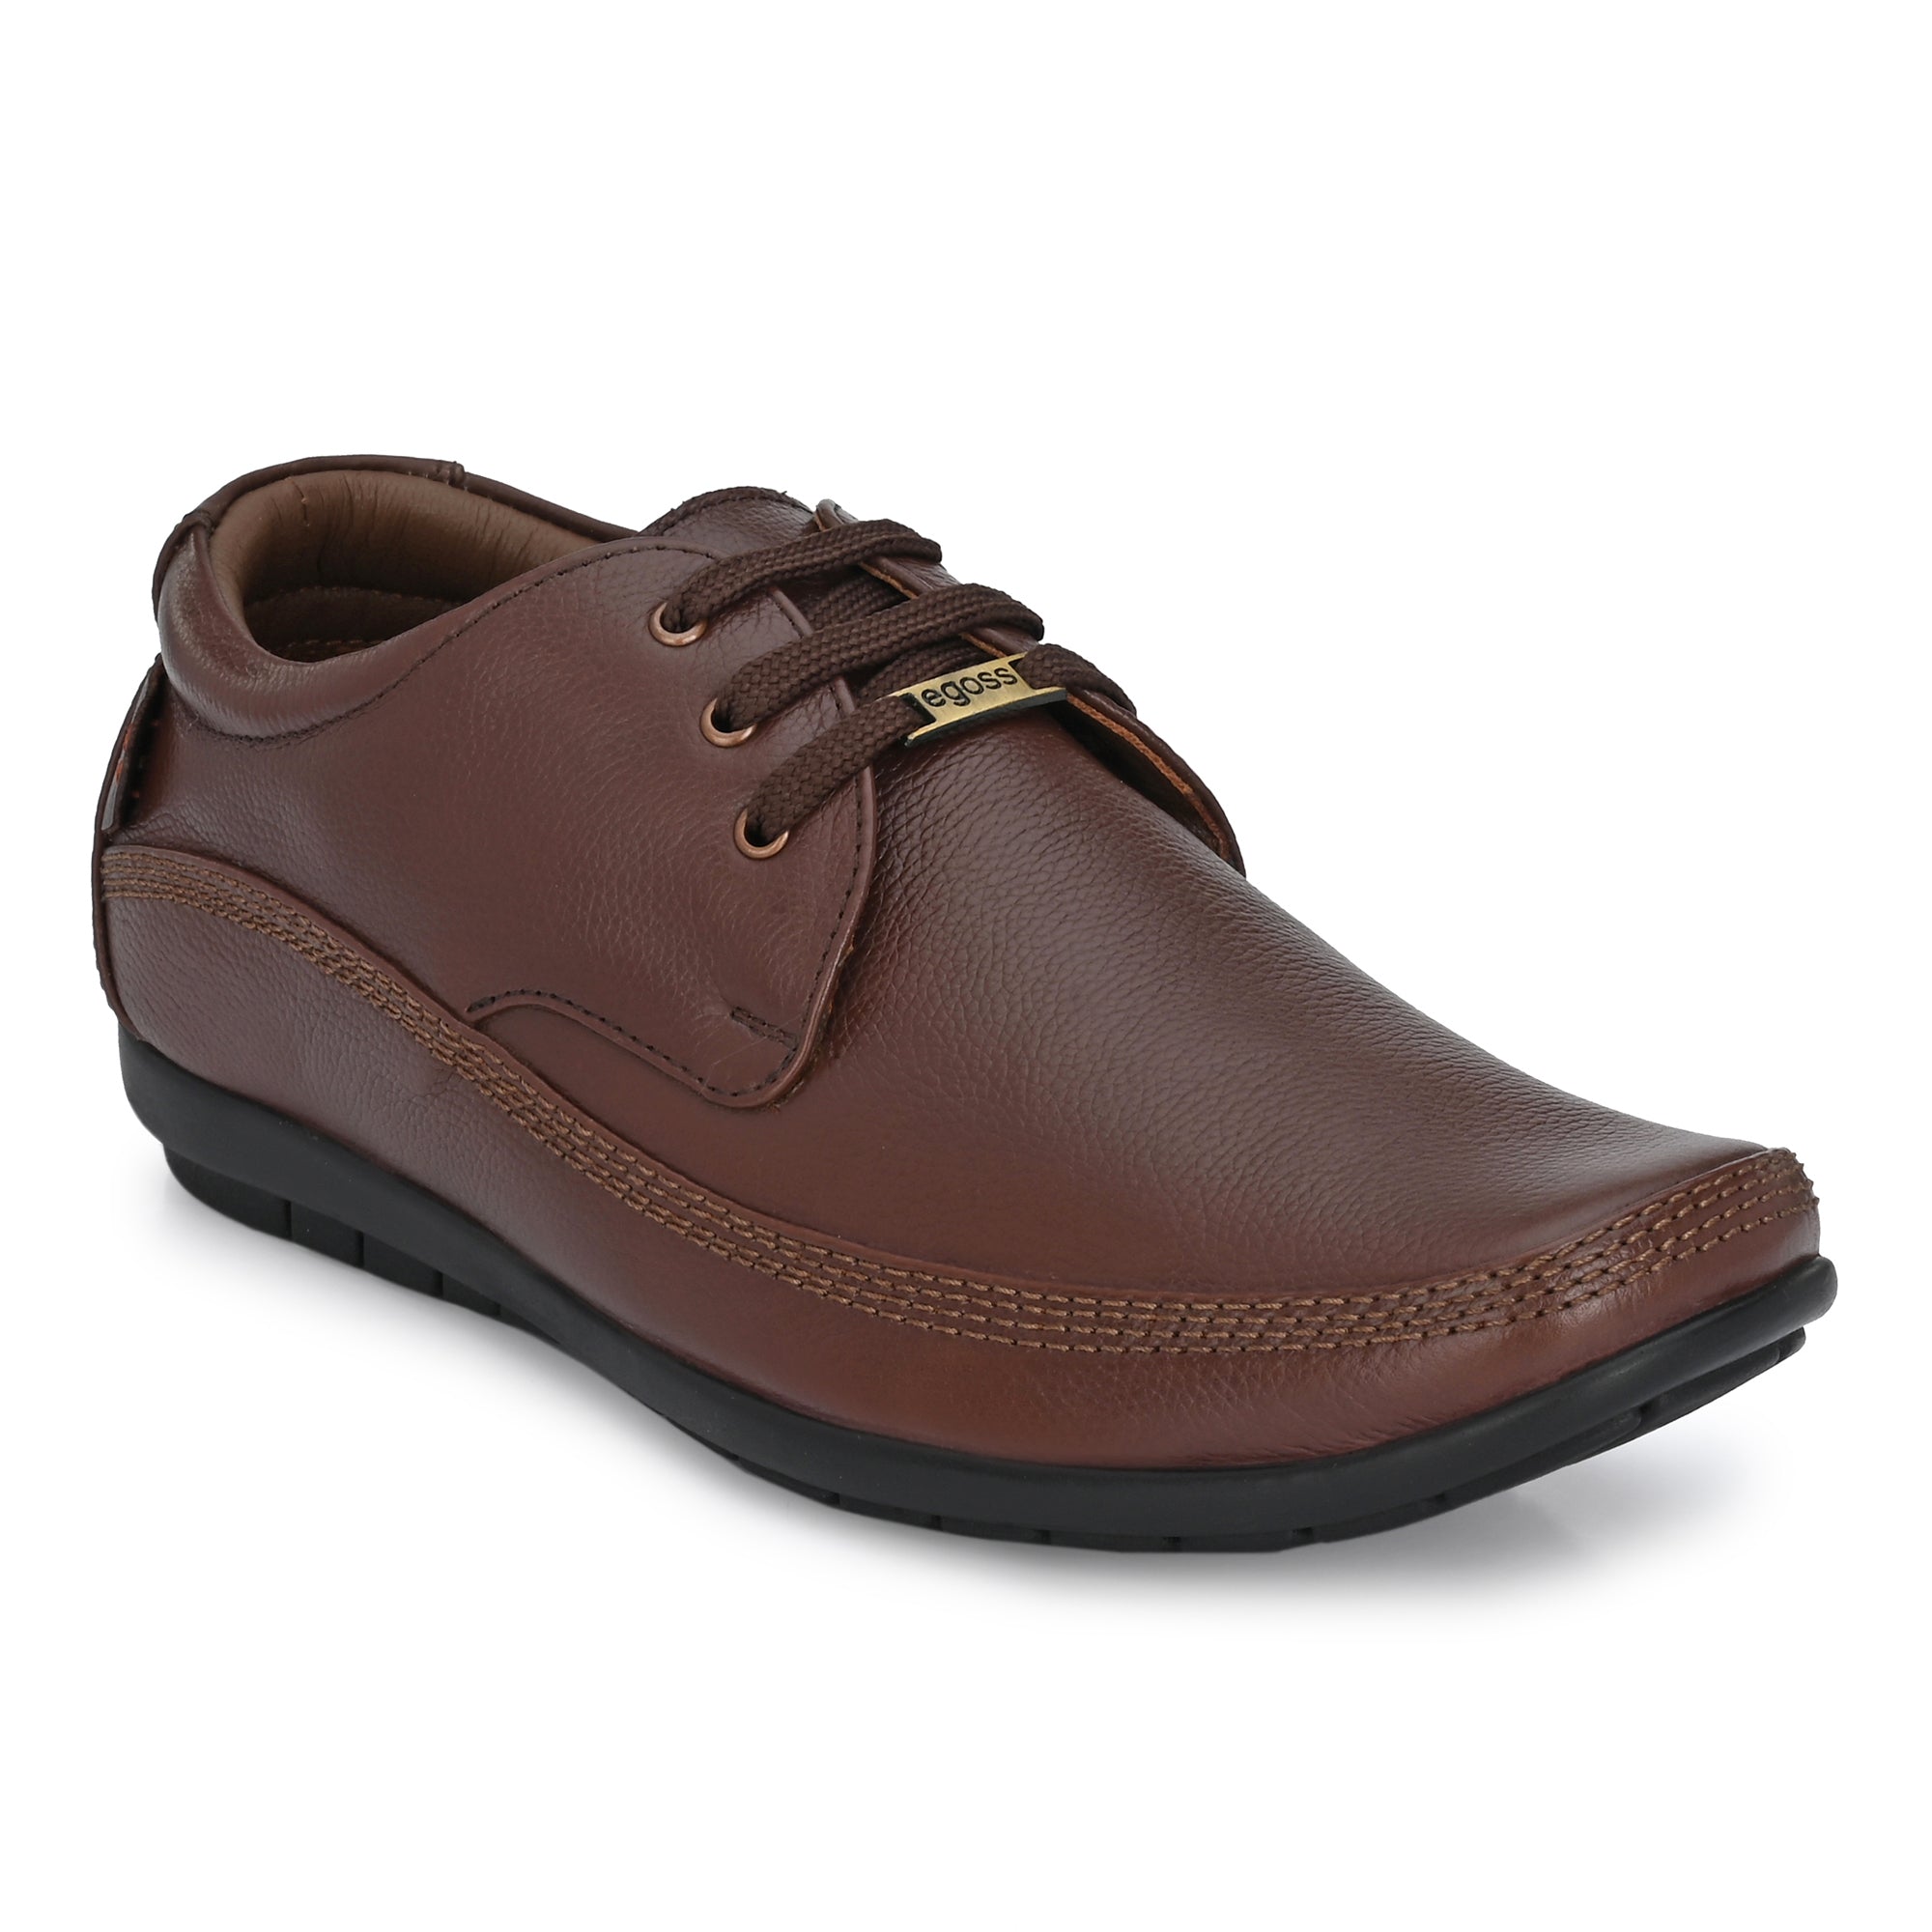 Egoss Leather Shoes for Men